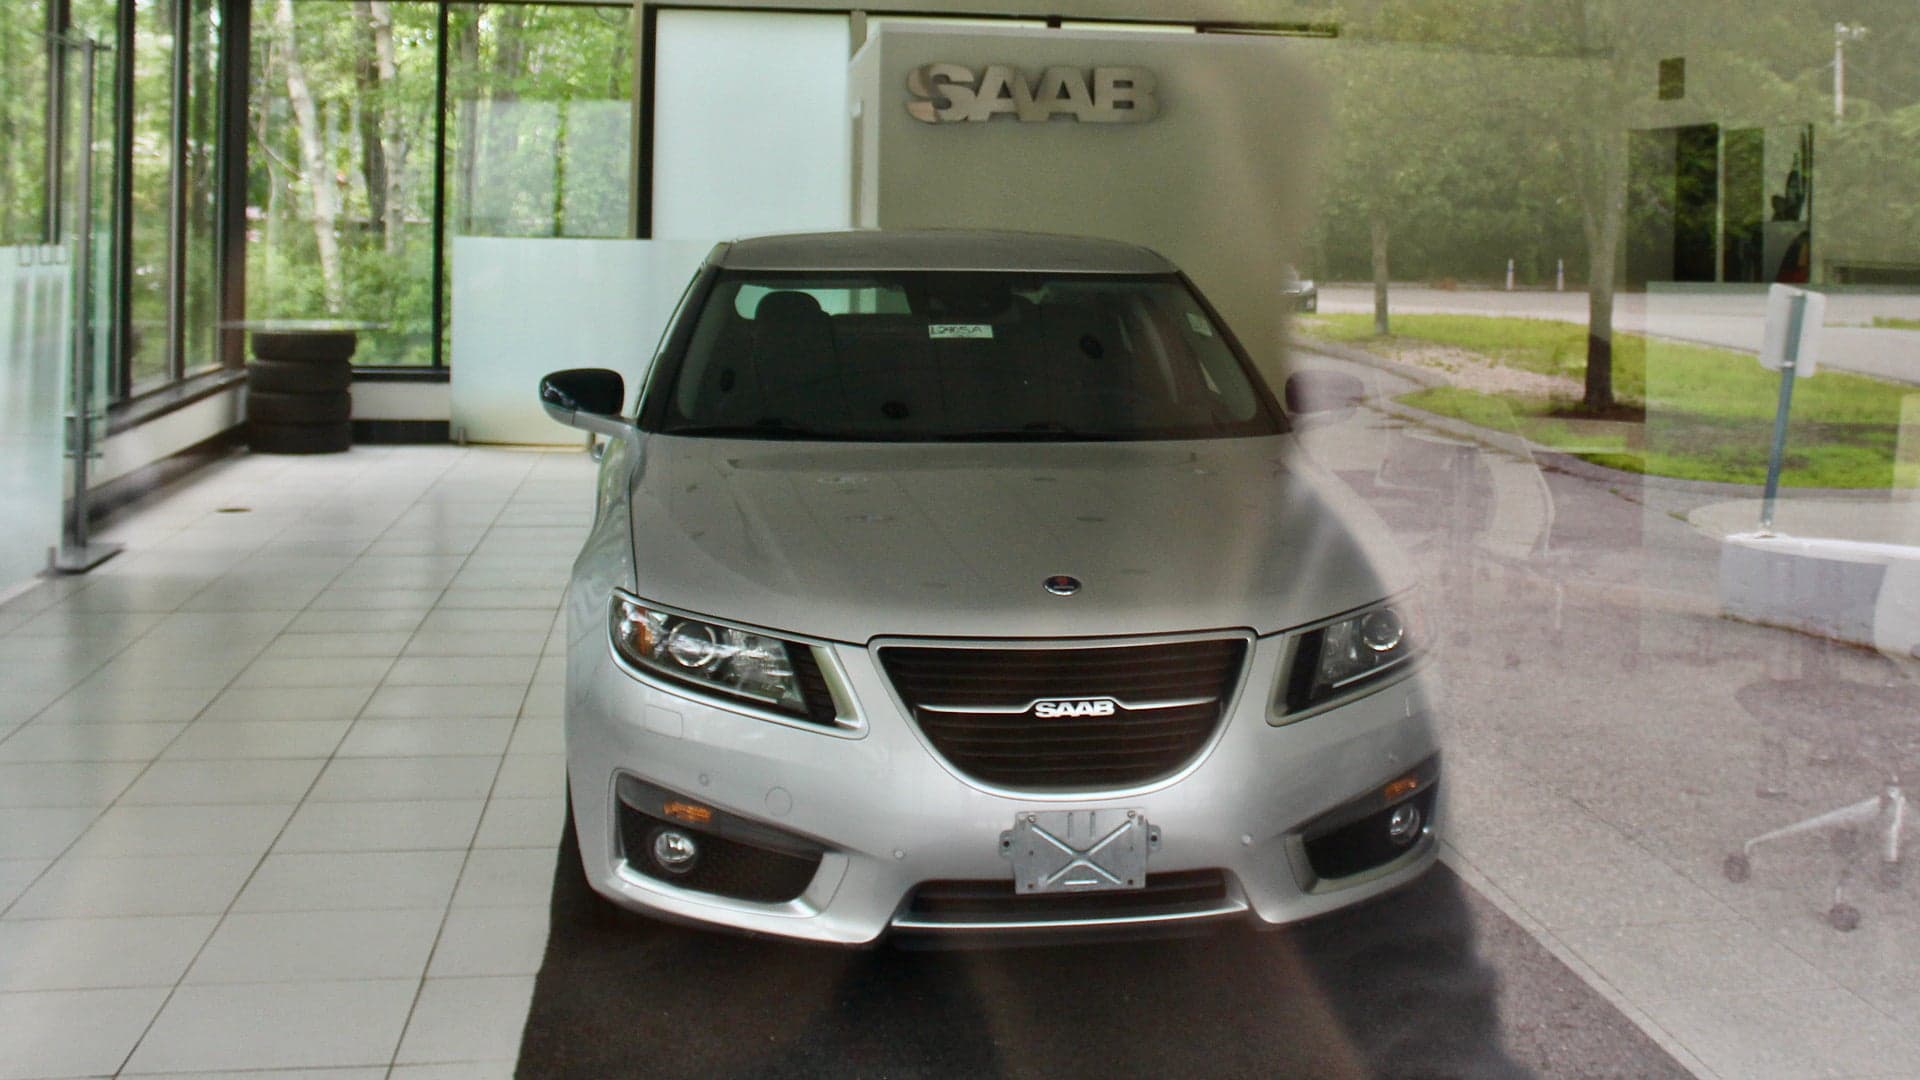 There’s a Shiny Saab 9-5 Inside This Old Saab Dealership in Massachusetts [UPDATED]